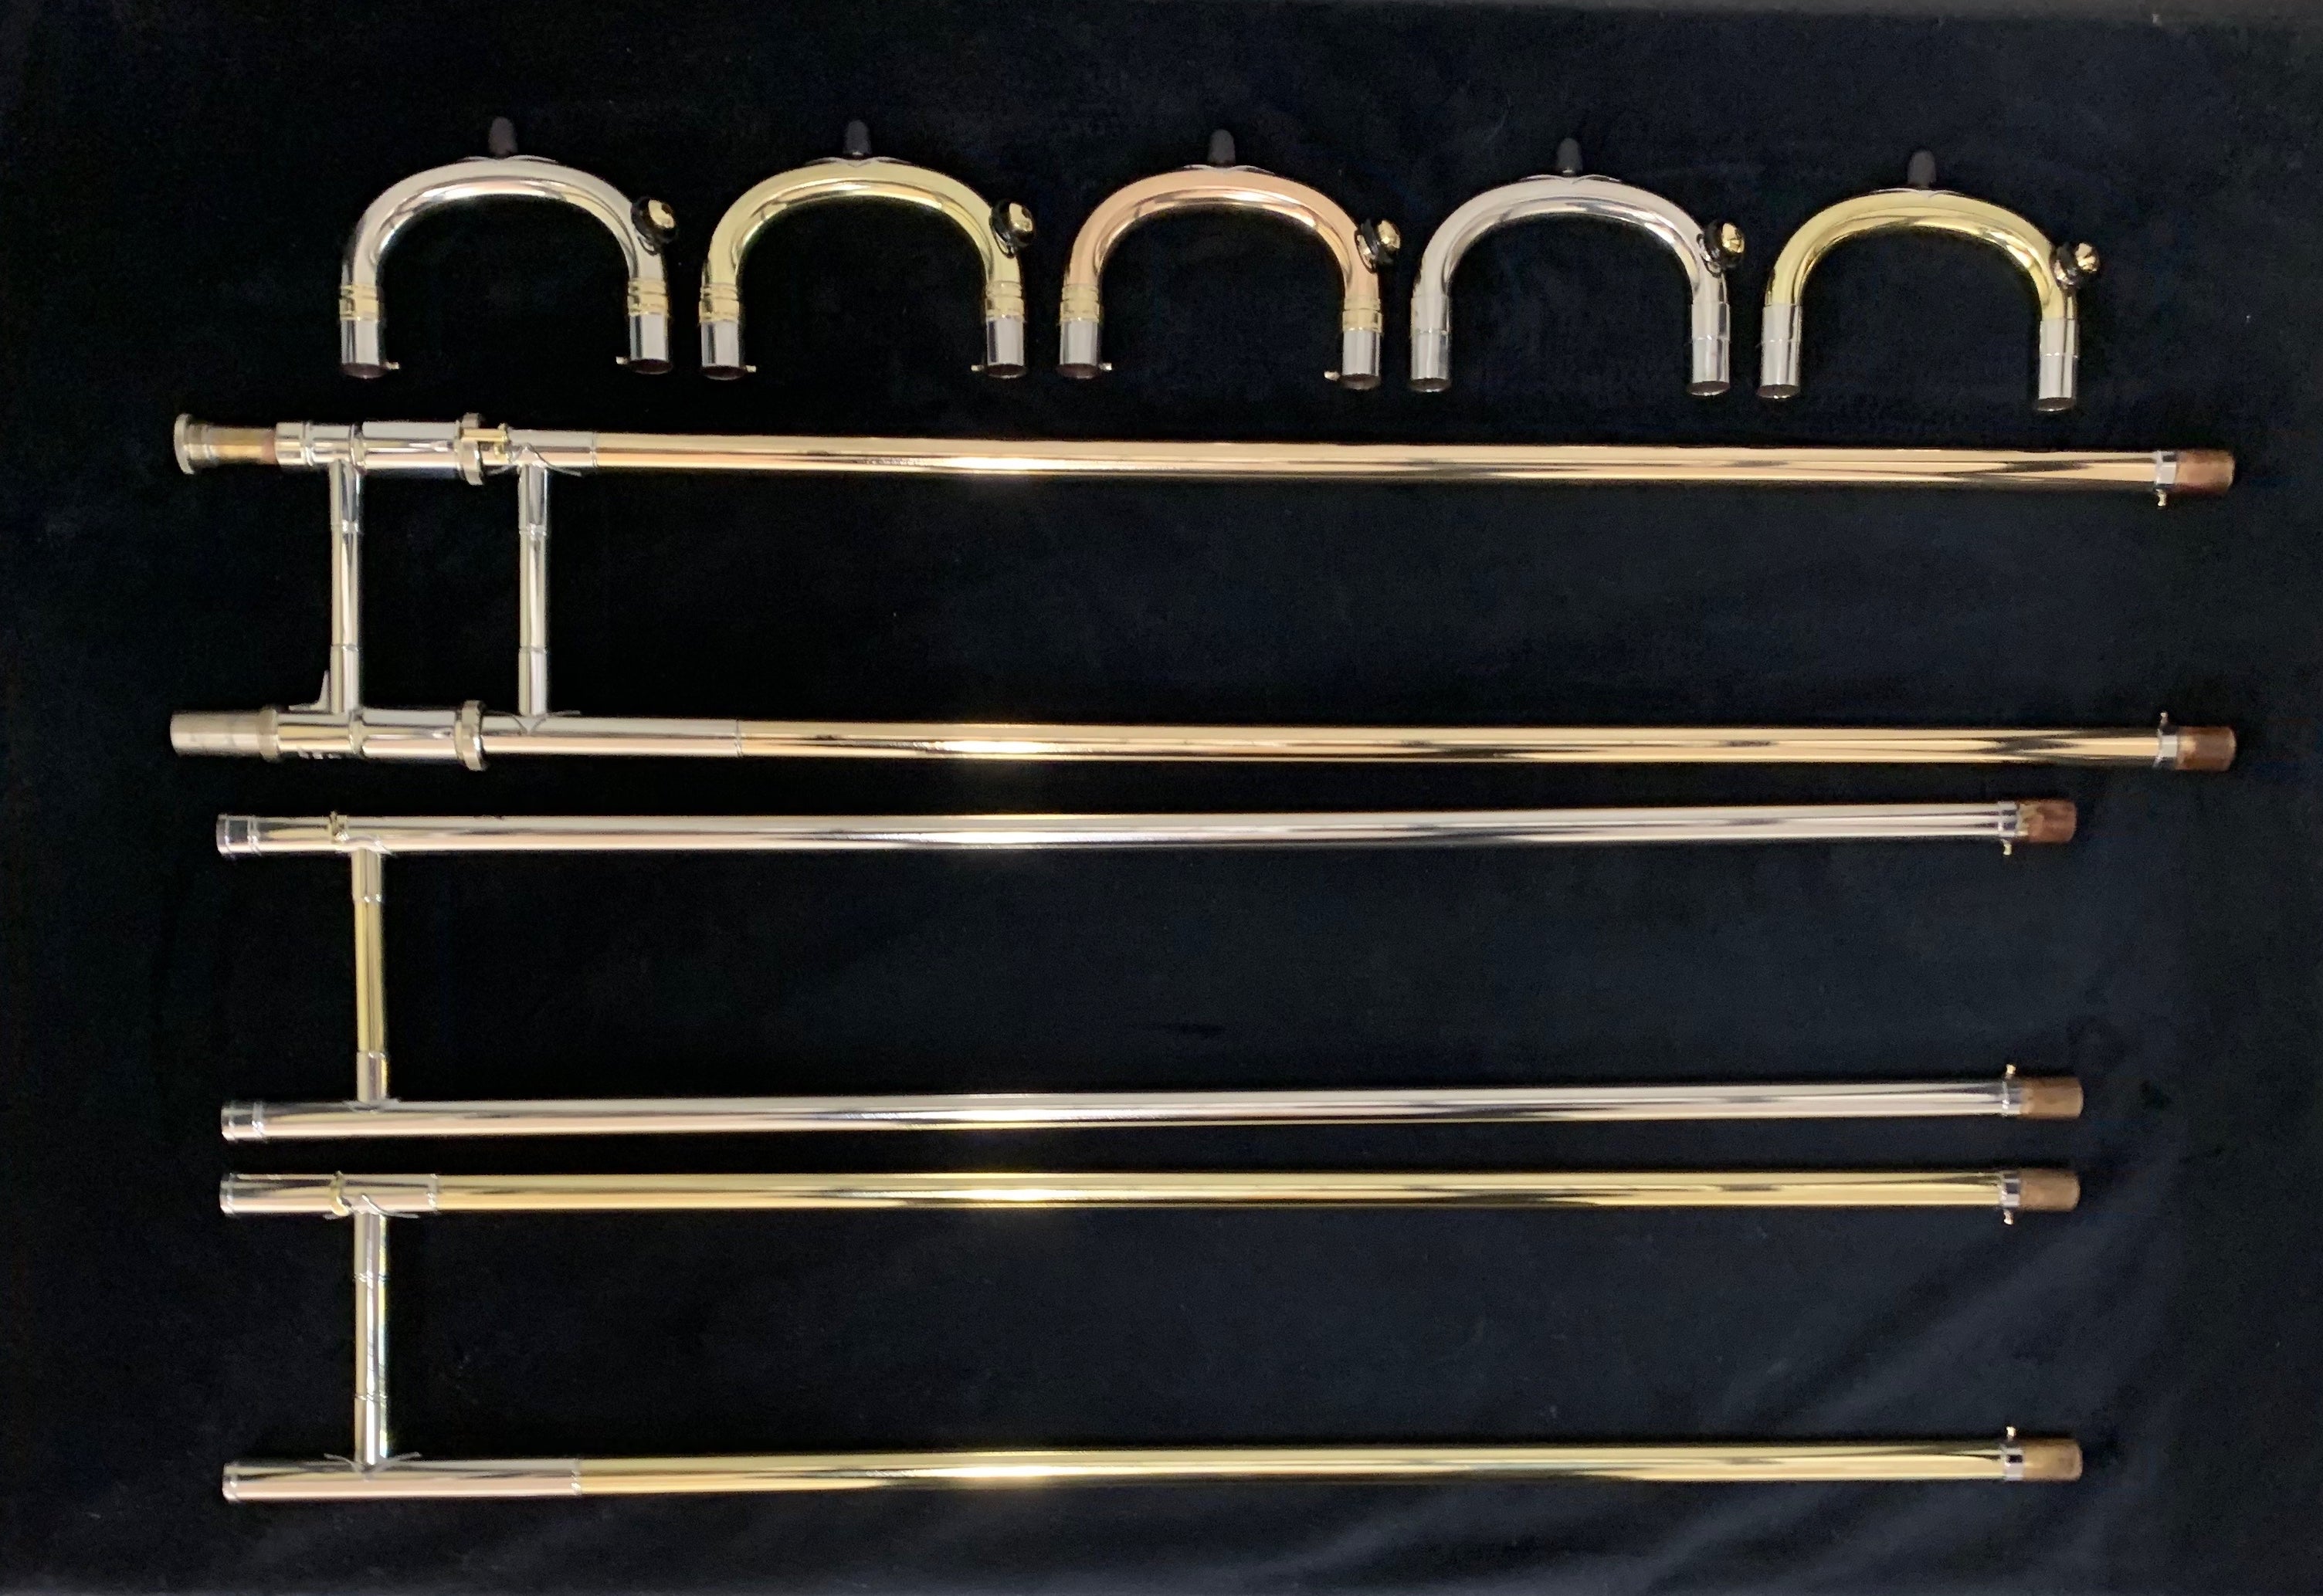 Introducing the Bach 42 Trial Slide – Diefes Brass Repair